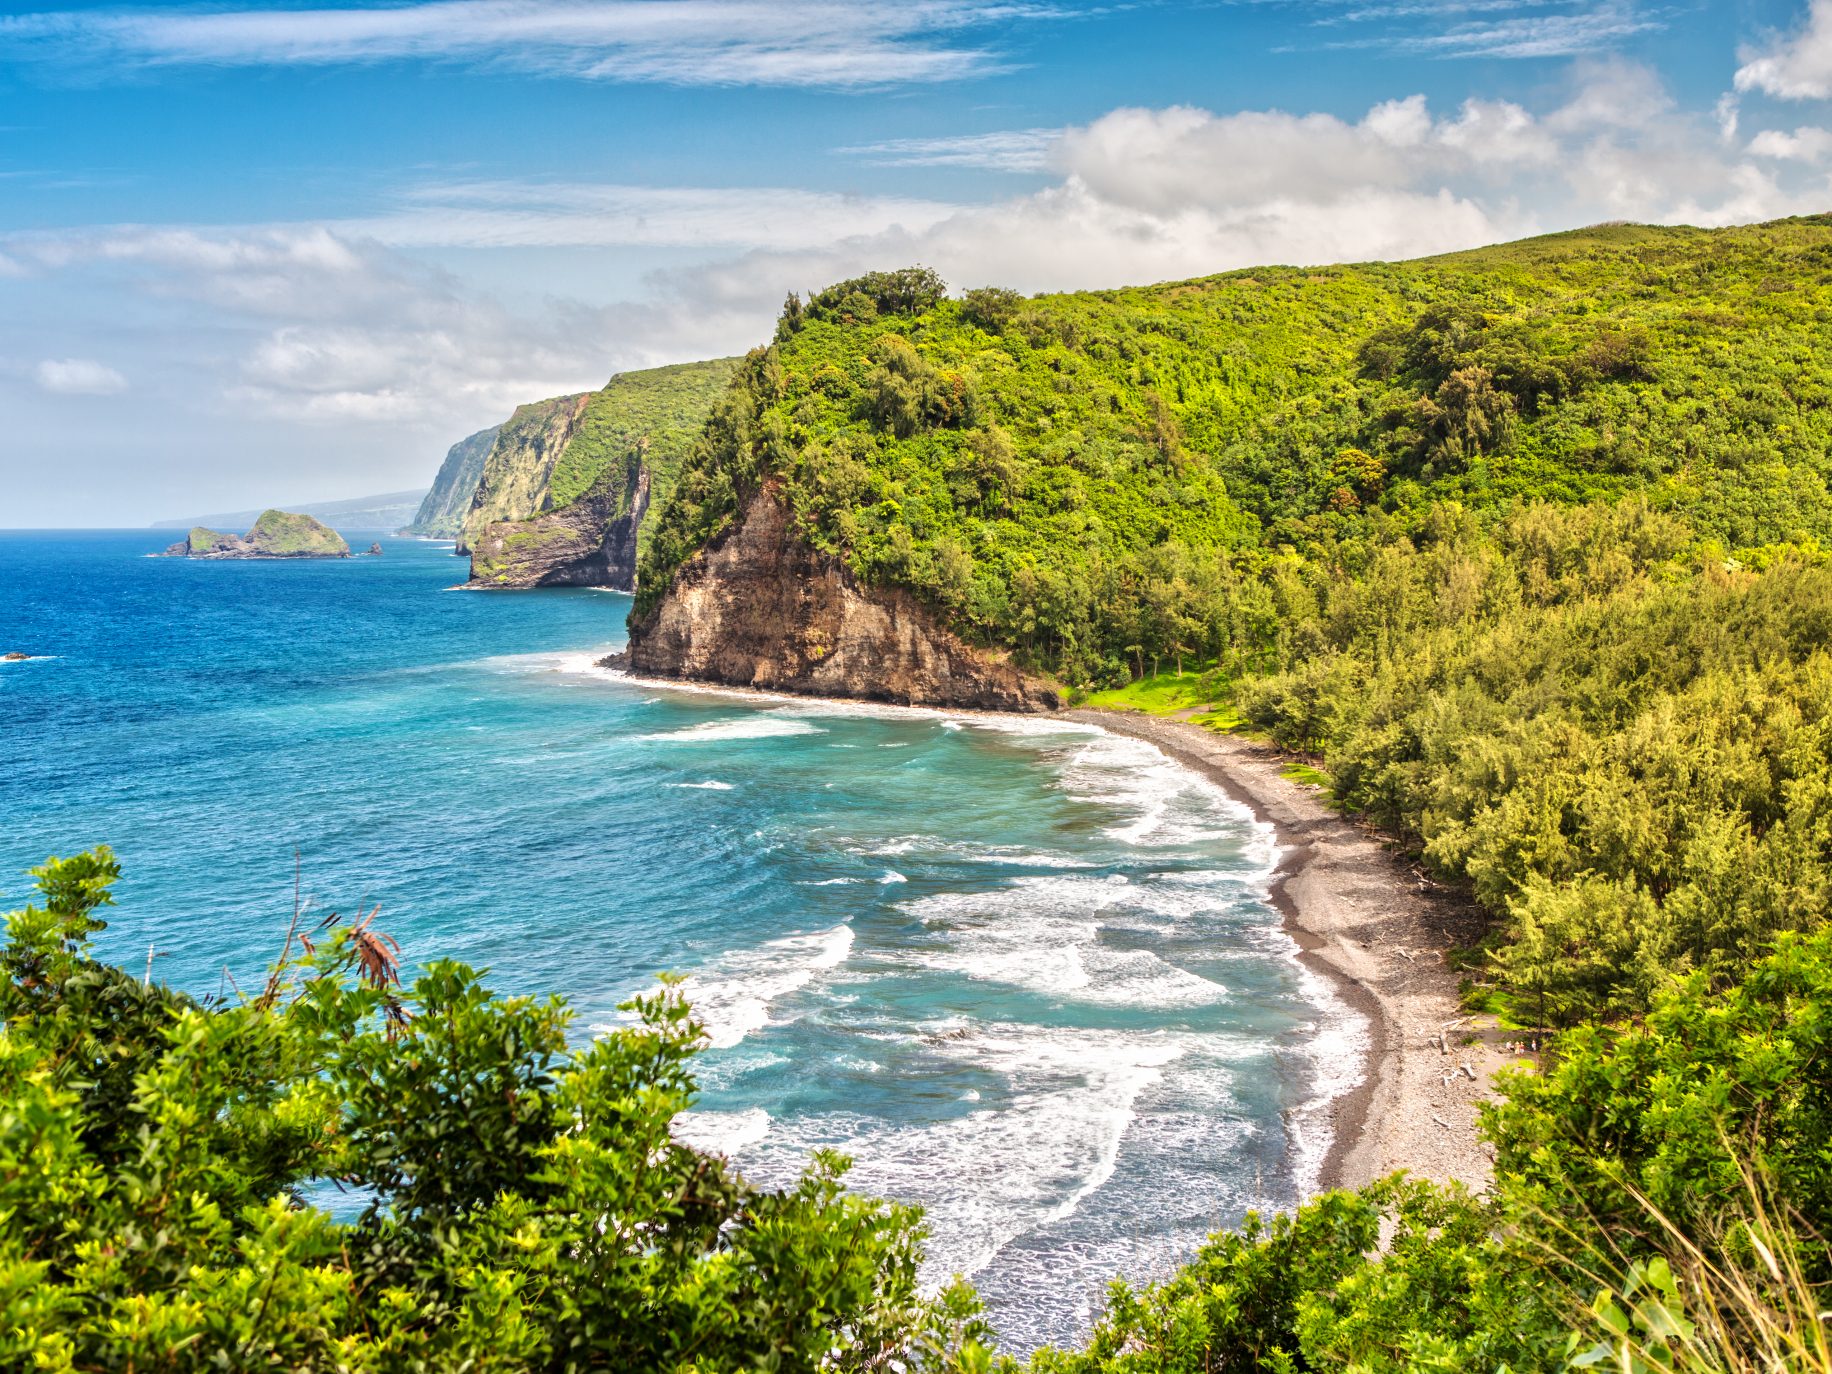 inexpensive time to visit hawaii